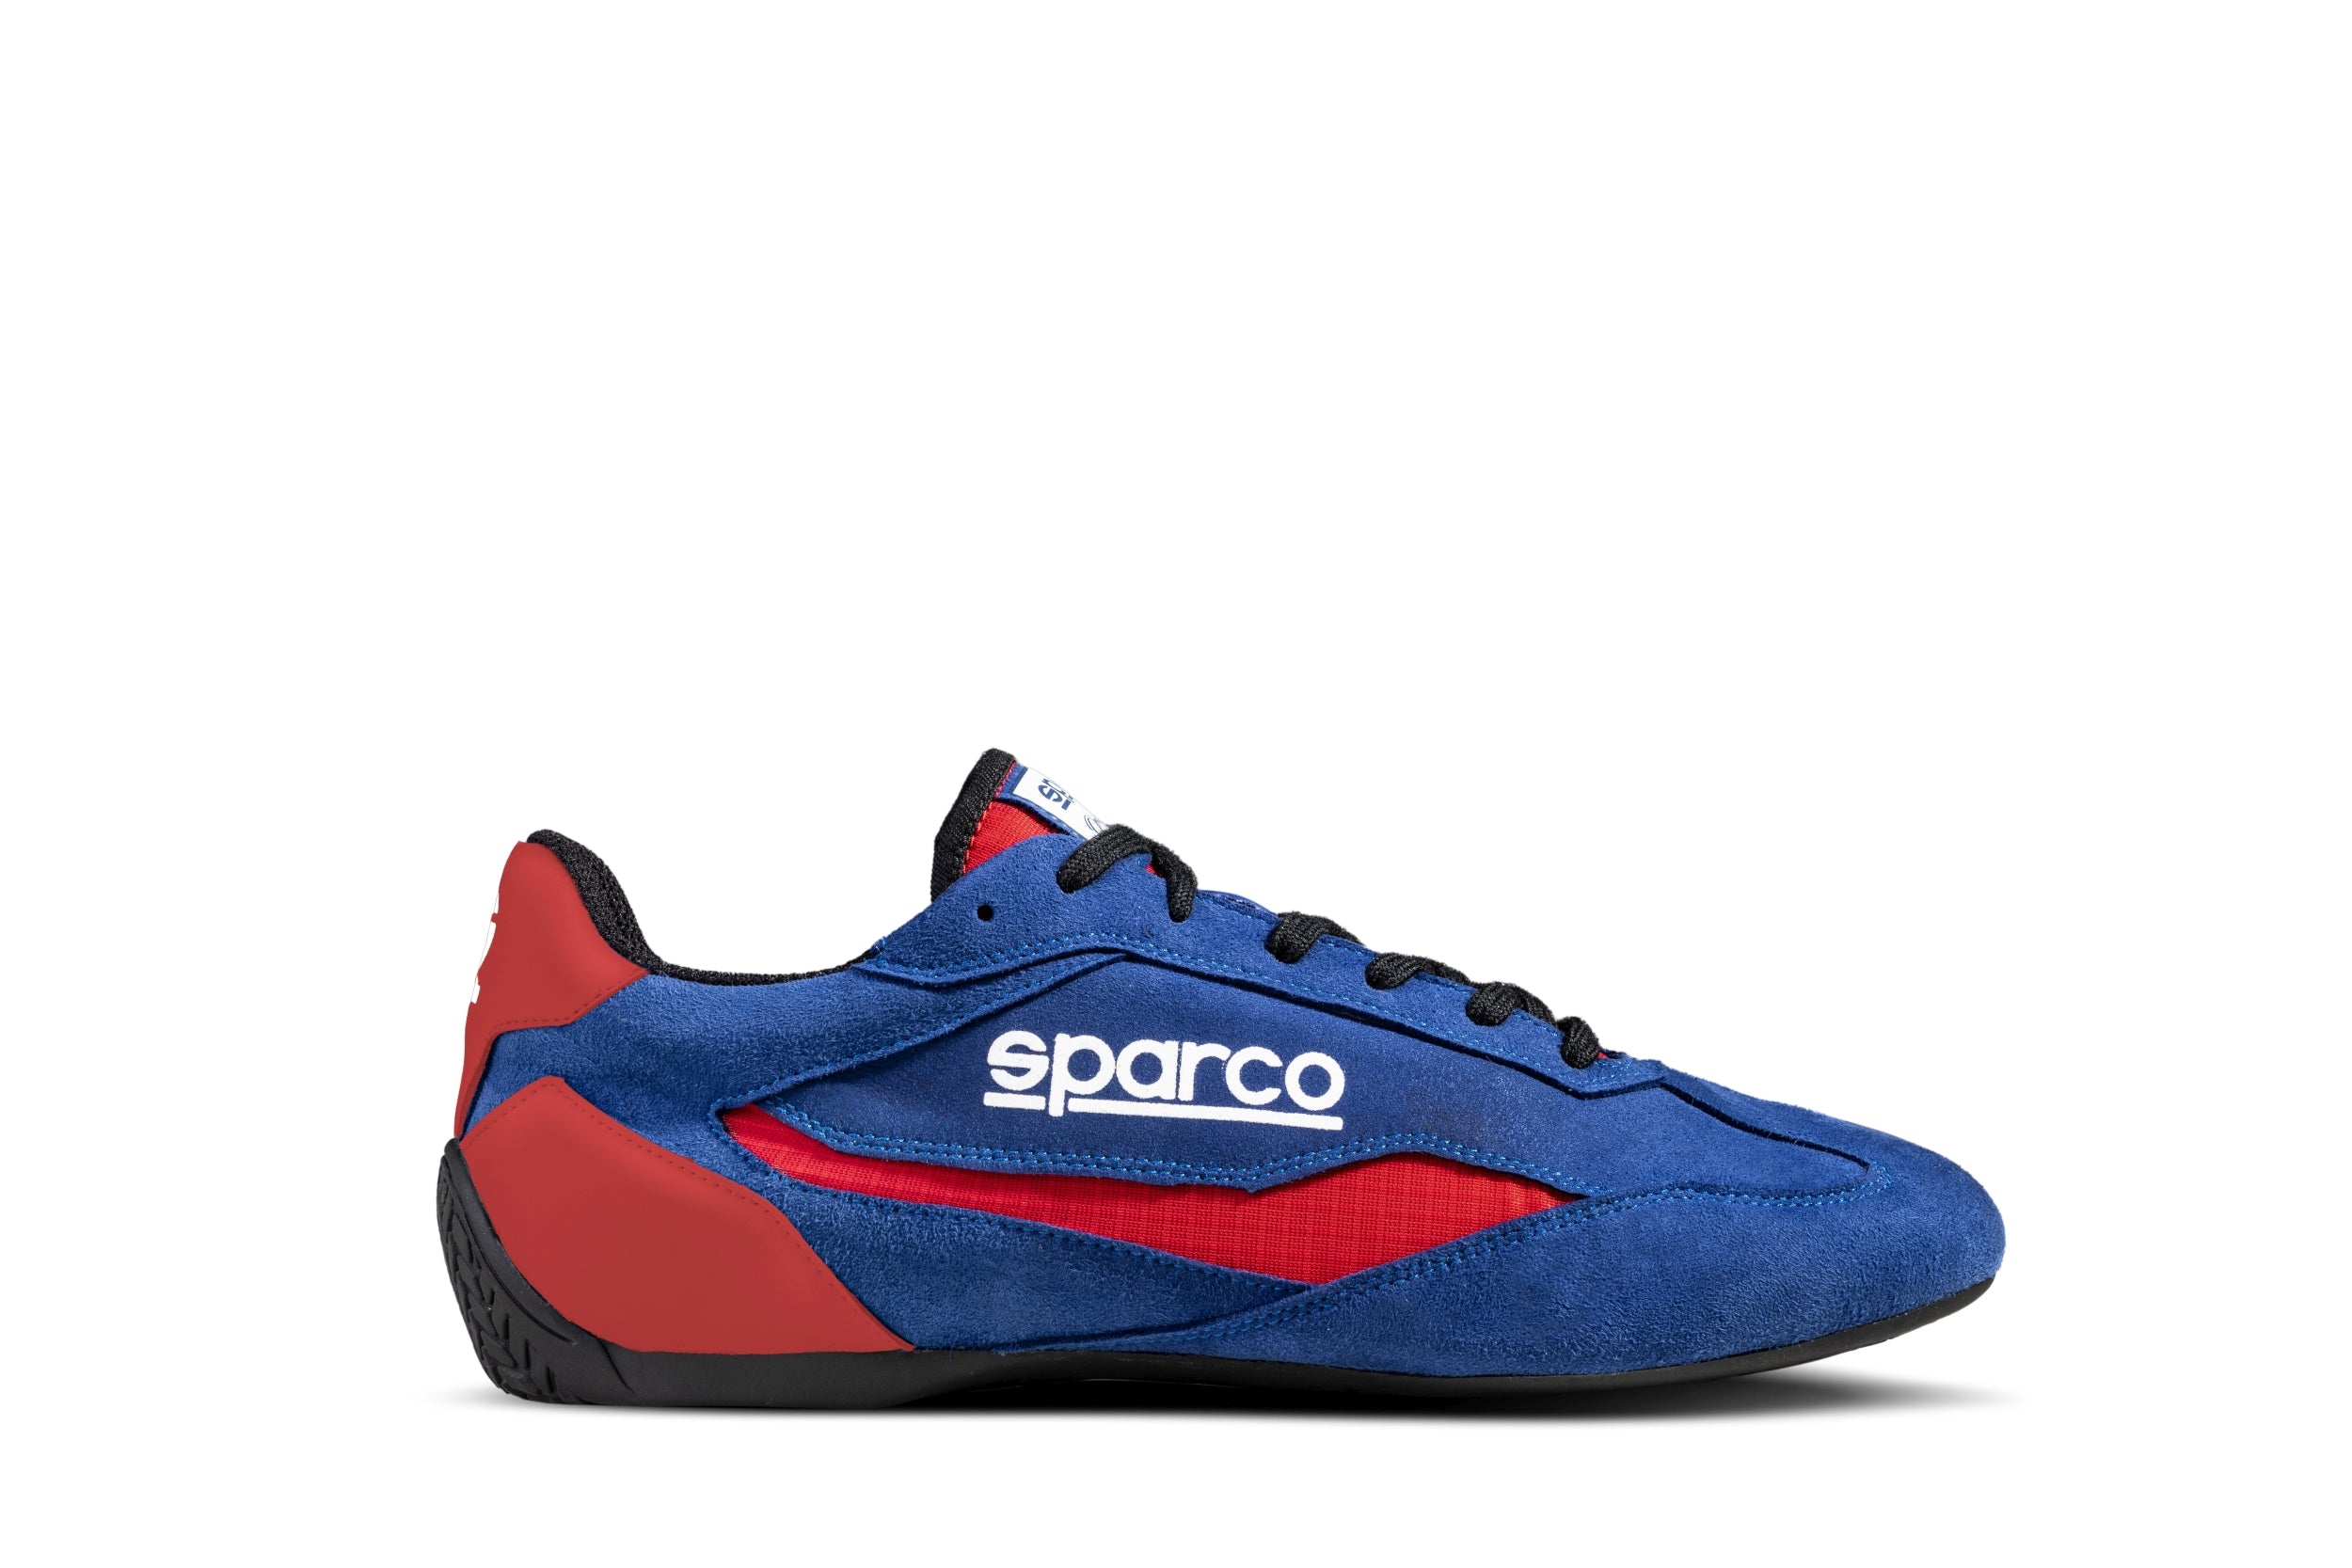 SPARCO 0012A746BMRS S-DRIVE Shoes, navy blue/red, size 46 Photo-2 